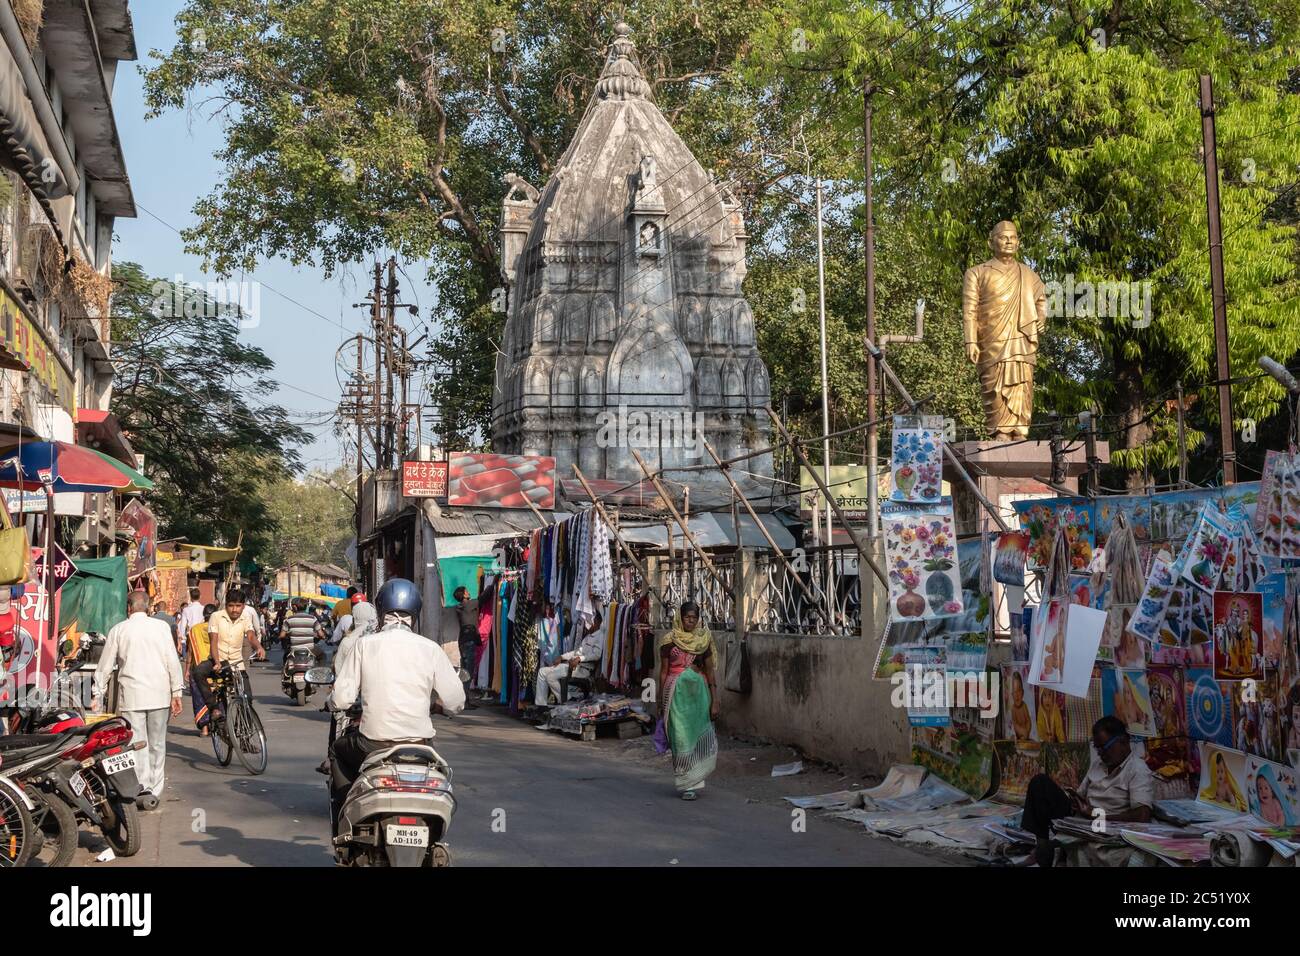 Nagpur, Maharashtra, India - March 2019: Traffic on the streets outside an old Hindu temple on the market streets of the Mahal area of the old city. Stock Photo